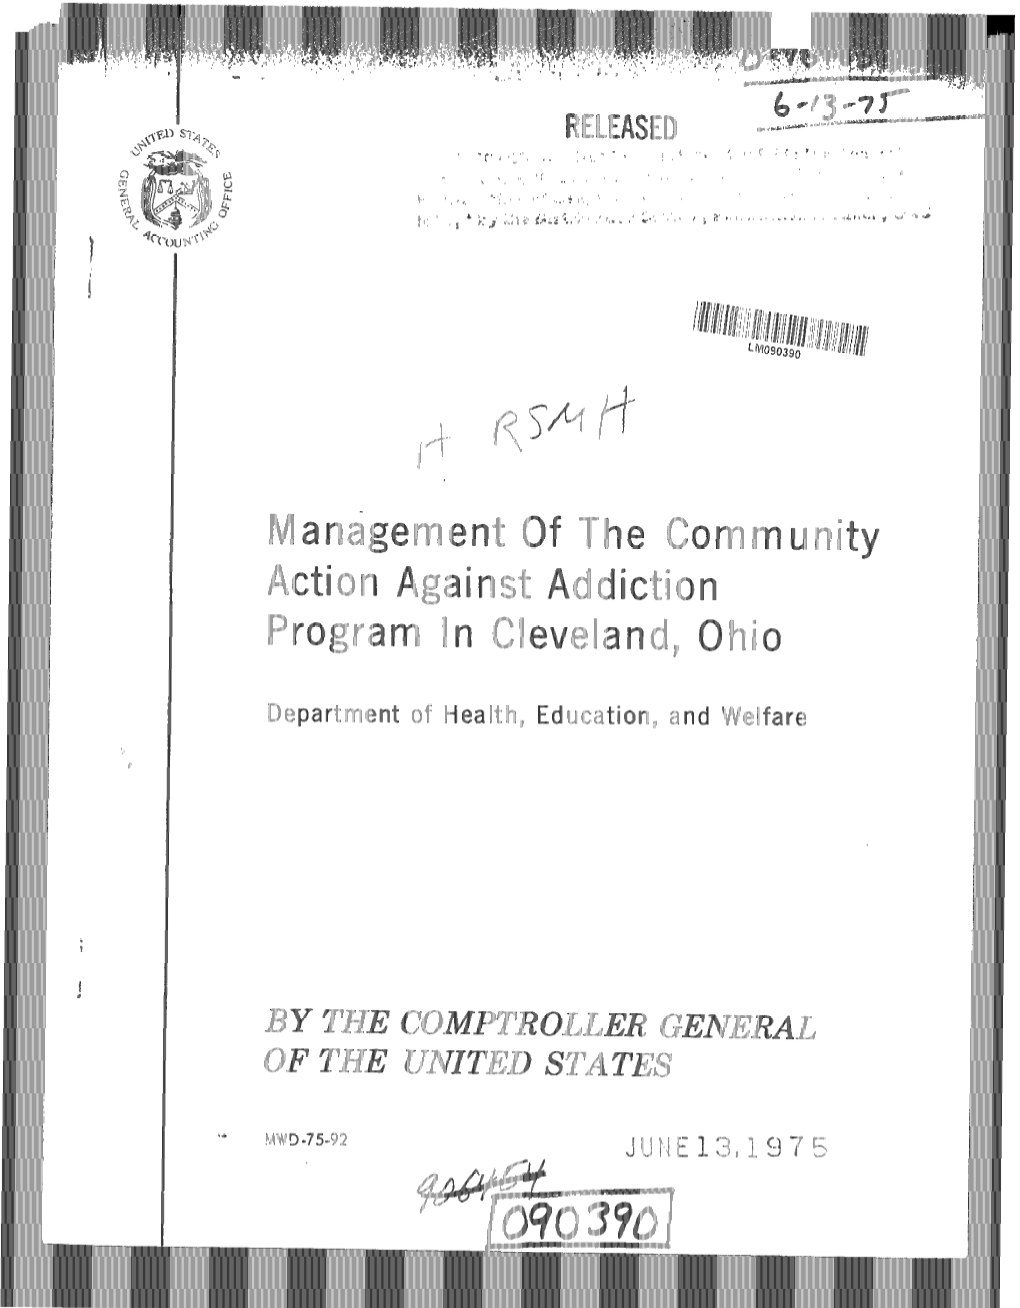 MWD-75-92 Management of the Community Action Against Addiction Program in Cleveland, Ohio